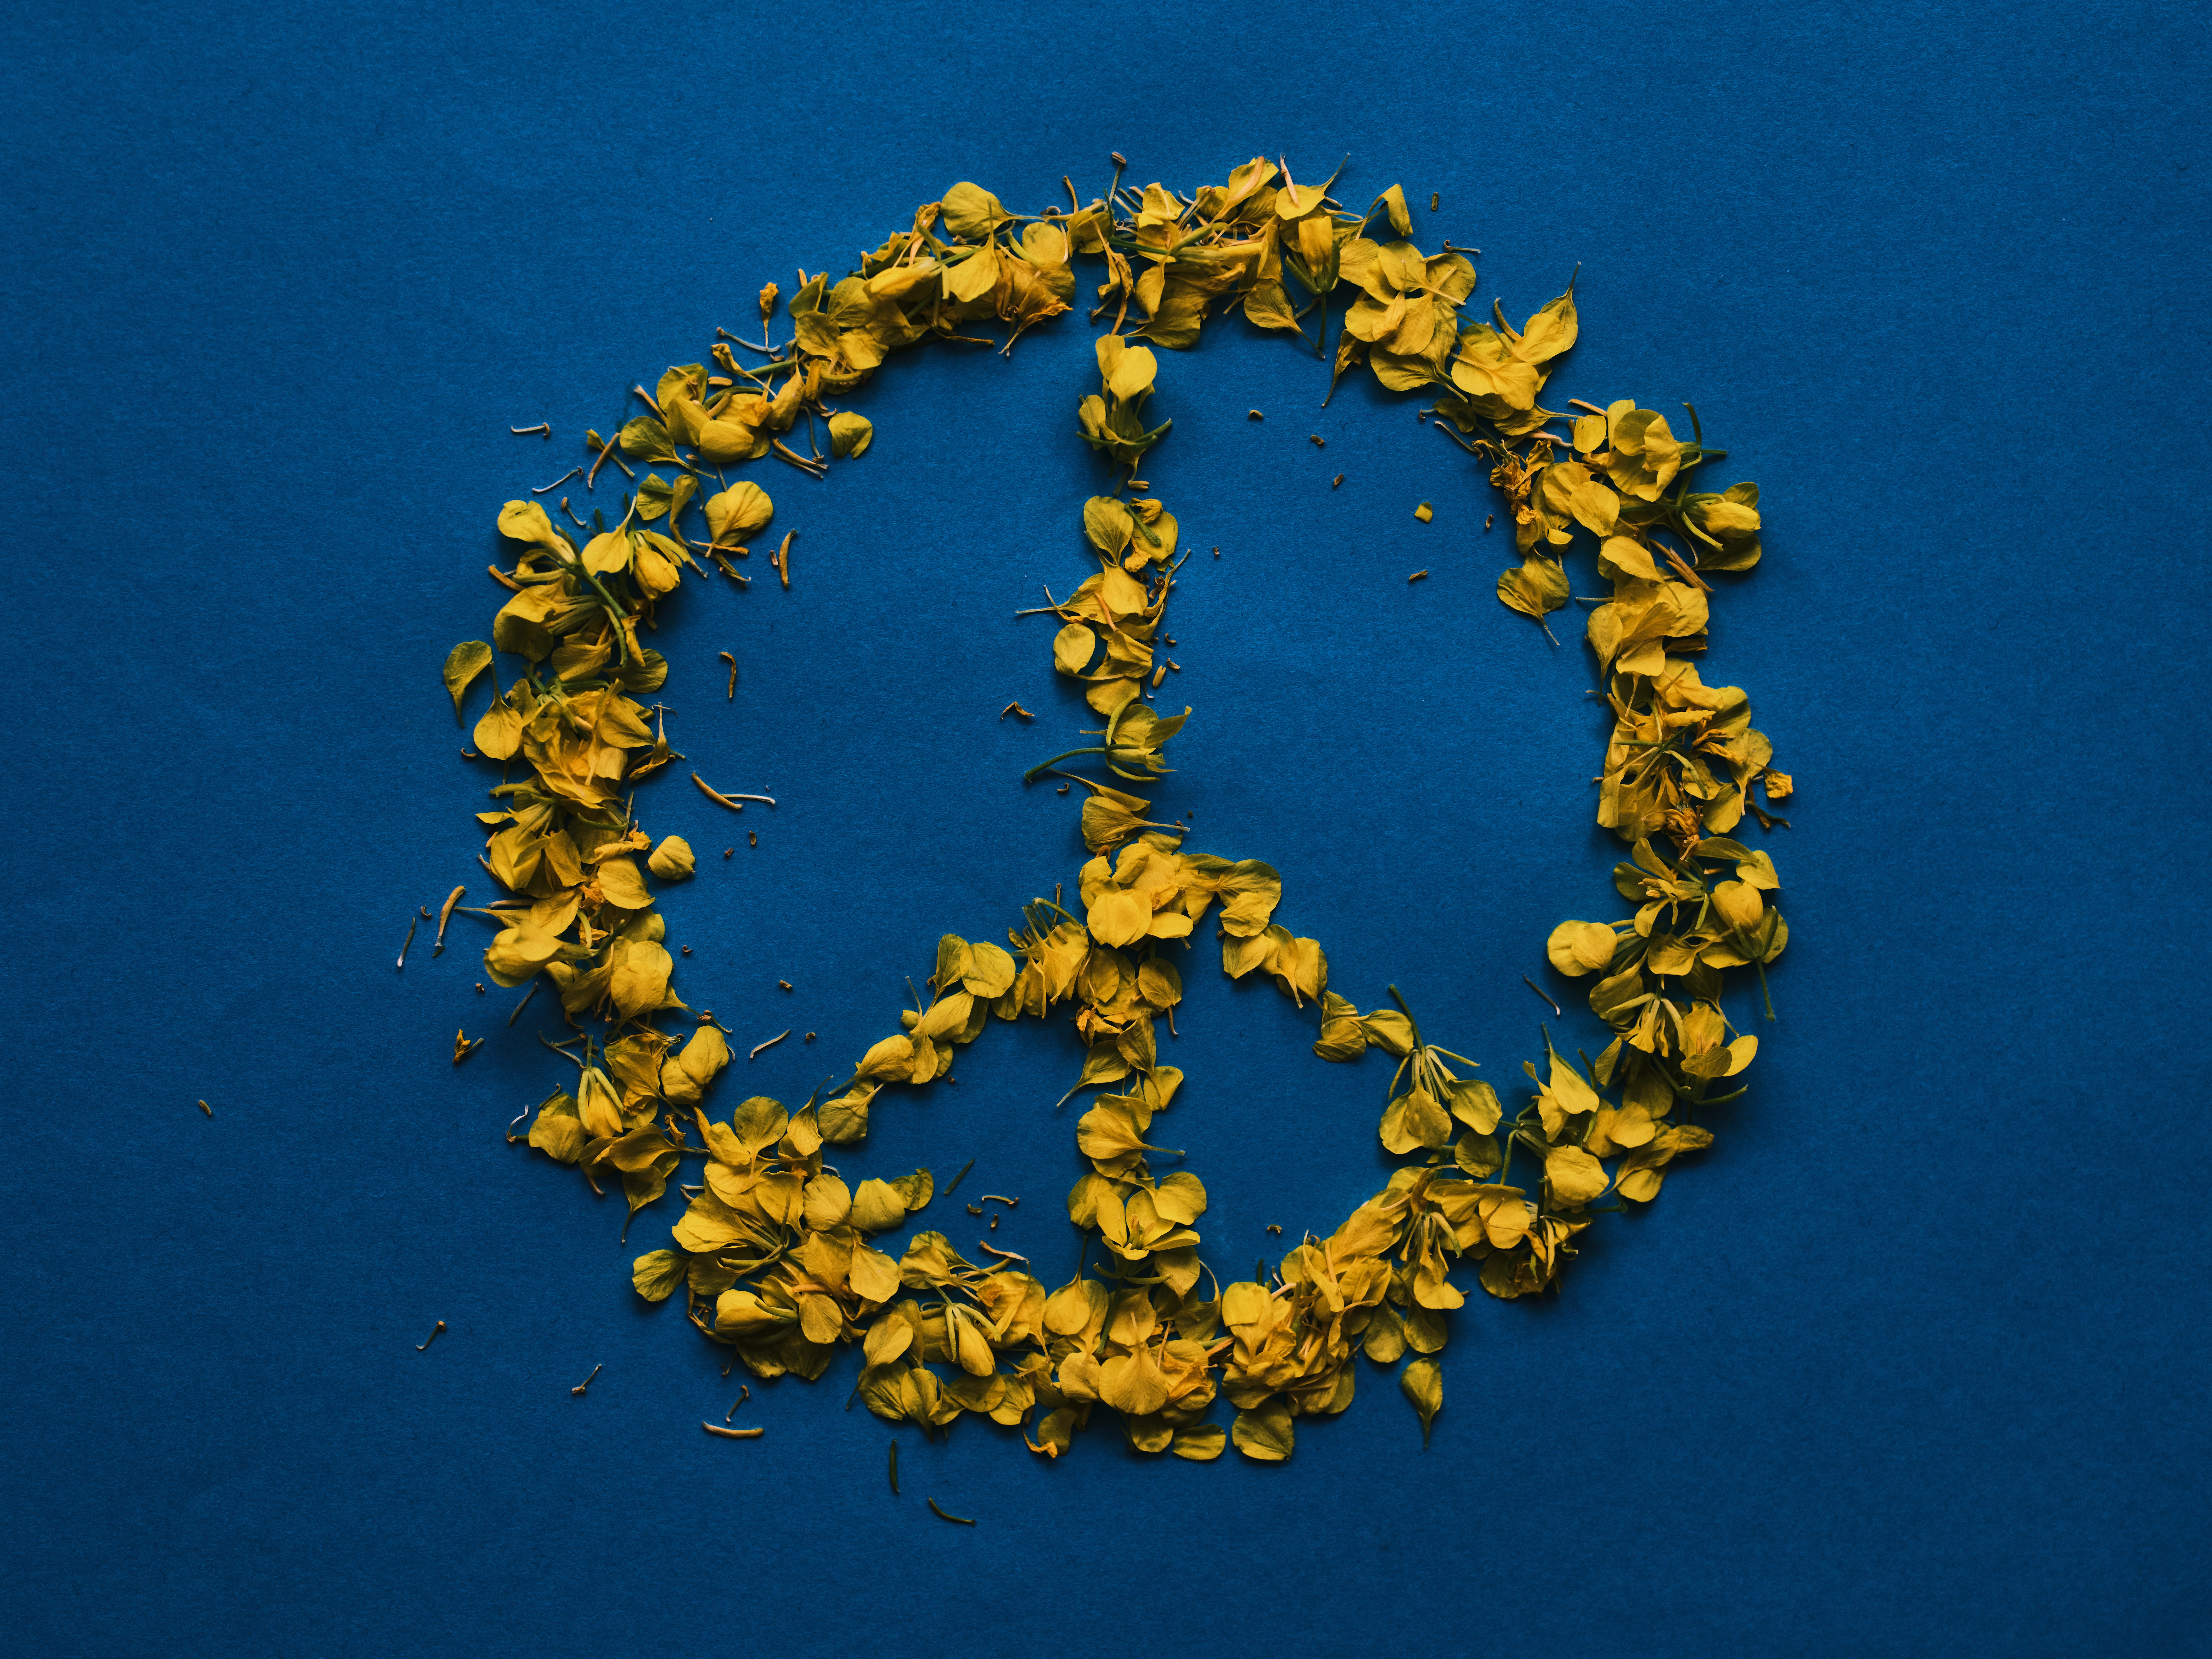 Peace symbol made out of yellow petals on a blue background (Photo by Engin Akyurt from Pexels)